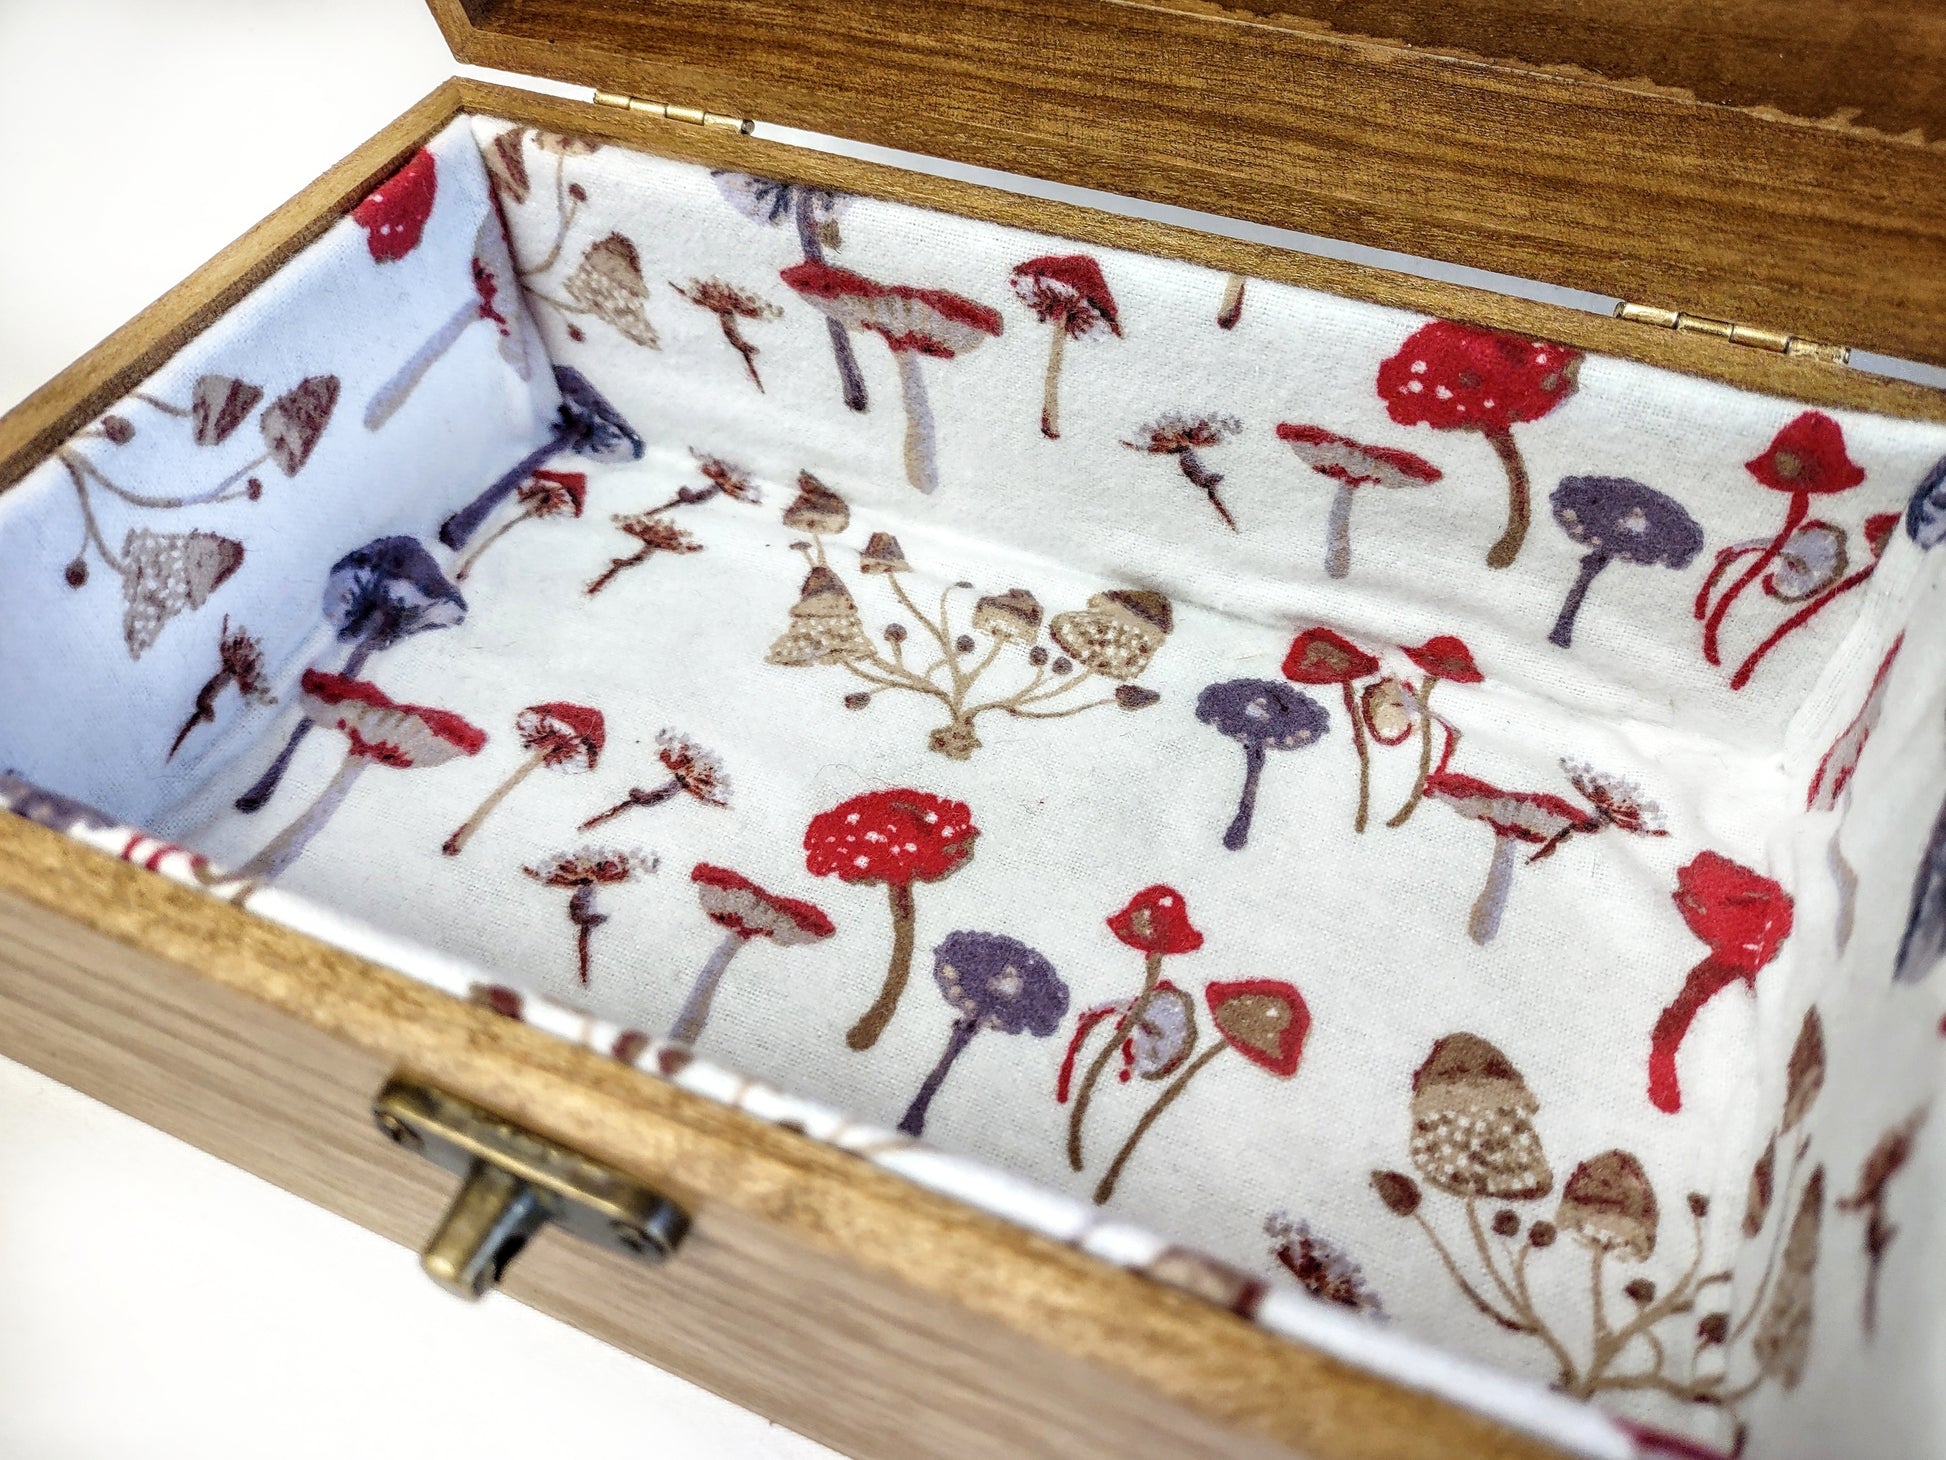 Magnificant Mushrooms Wooden Box - Hard Candy Woodshop